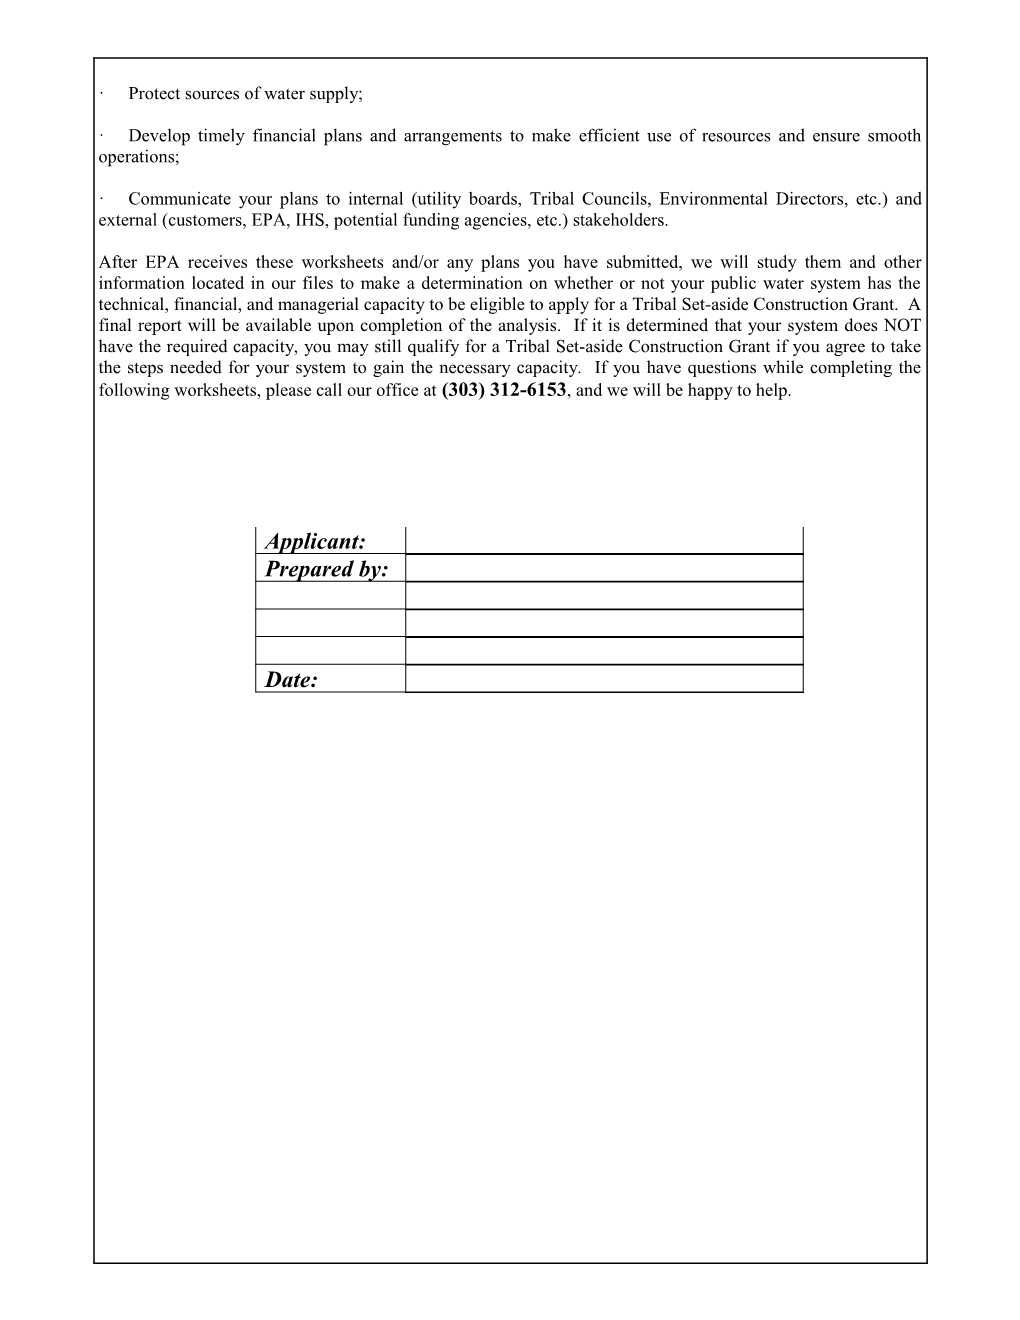 Capacity Assessment and Planning Worksheets